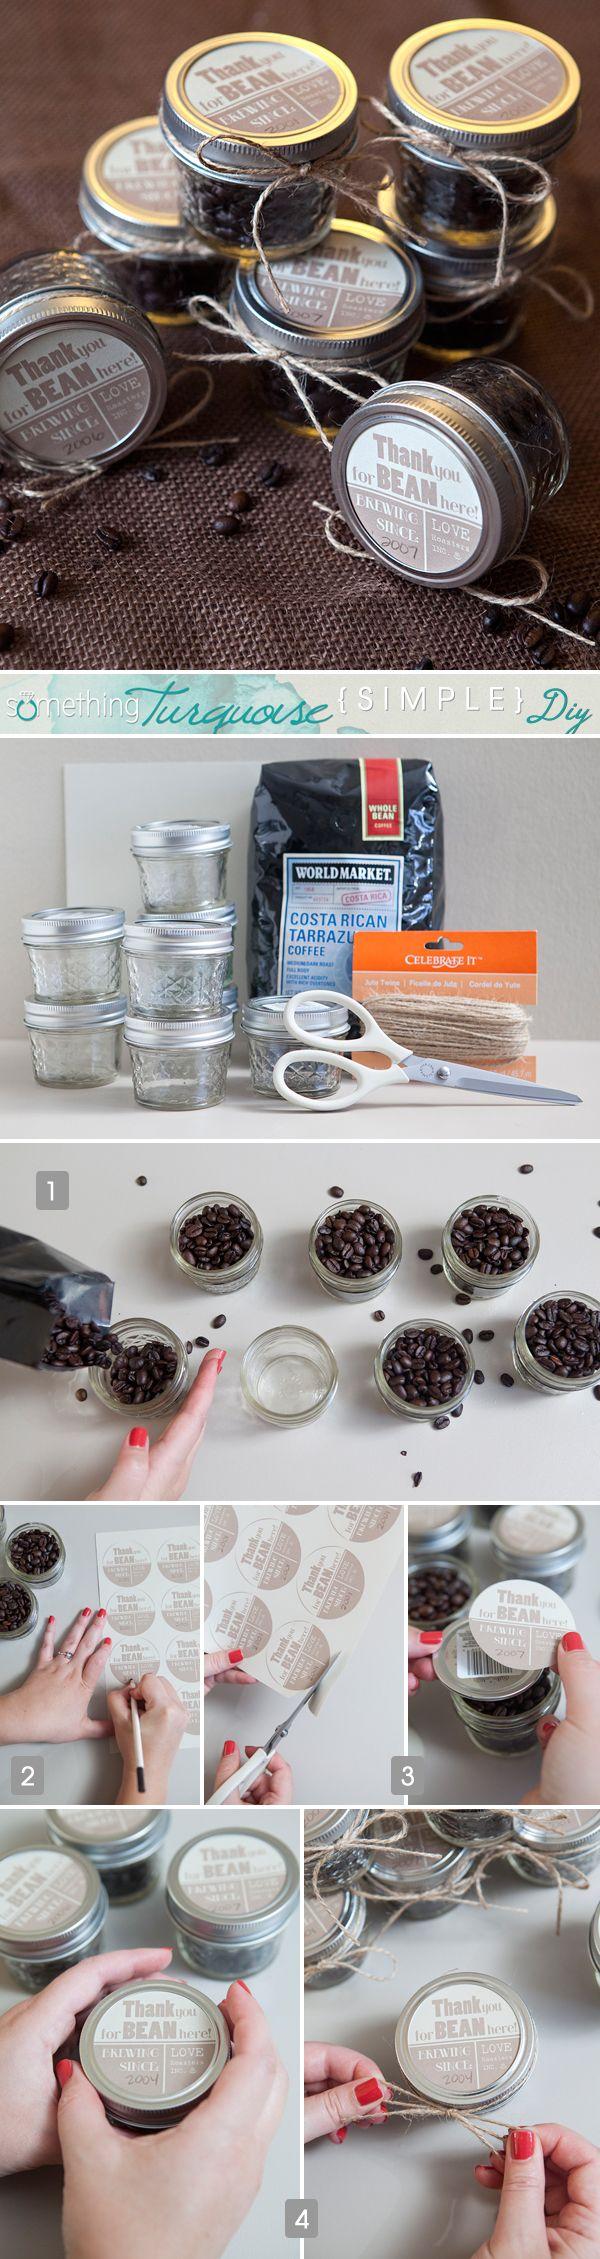 Свадьба - Check Out These Adorable Coffee Bean Wedding Favors In Mason Jars!